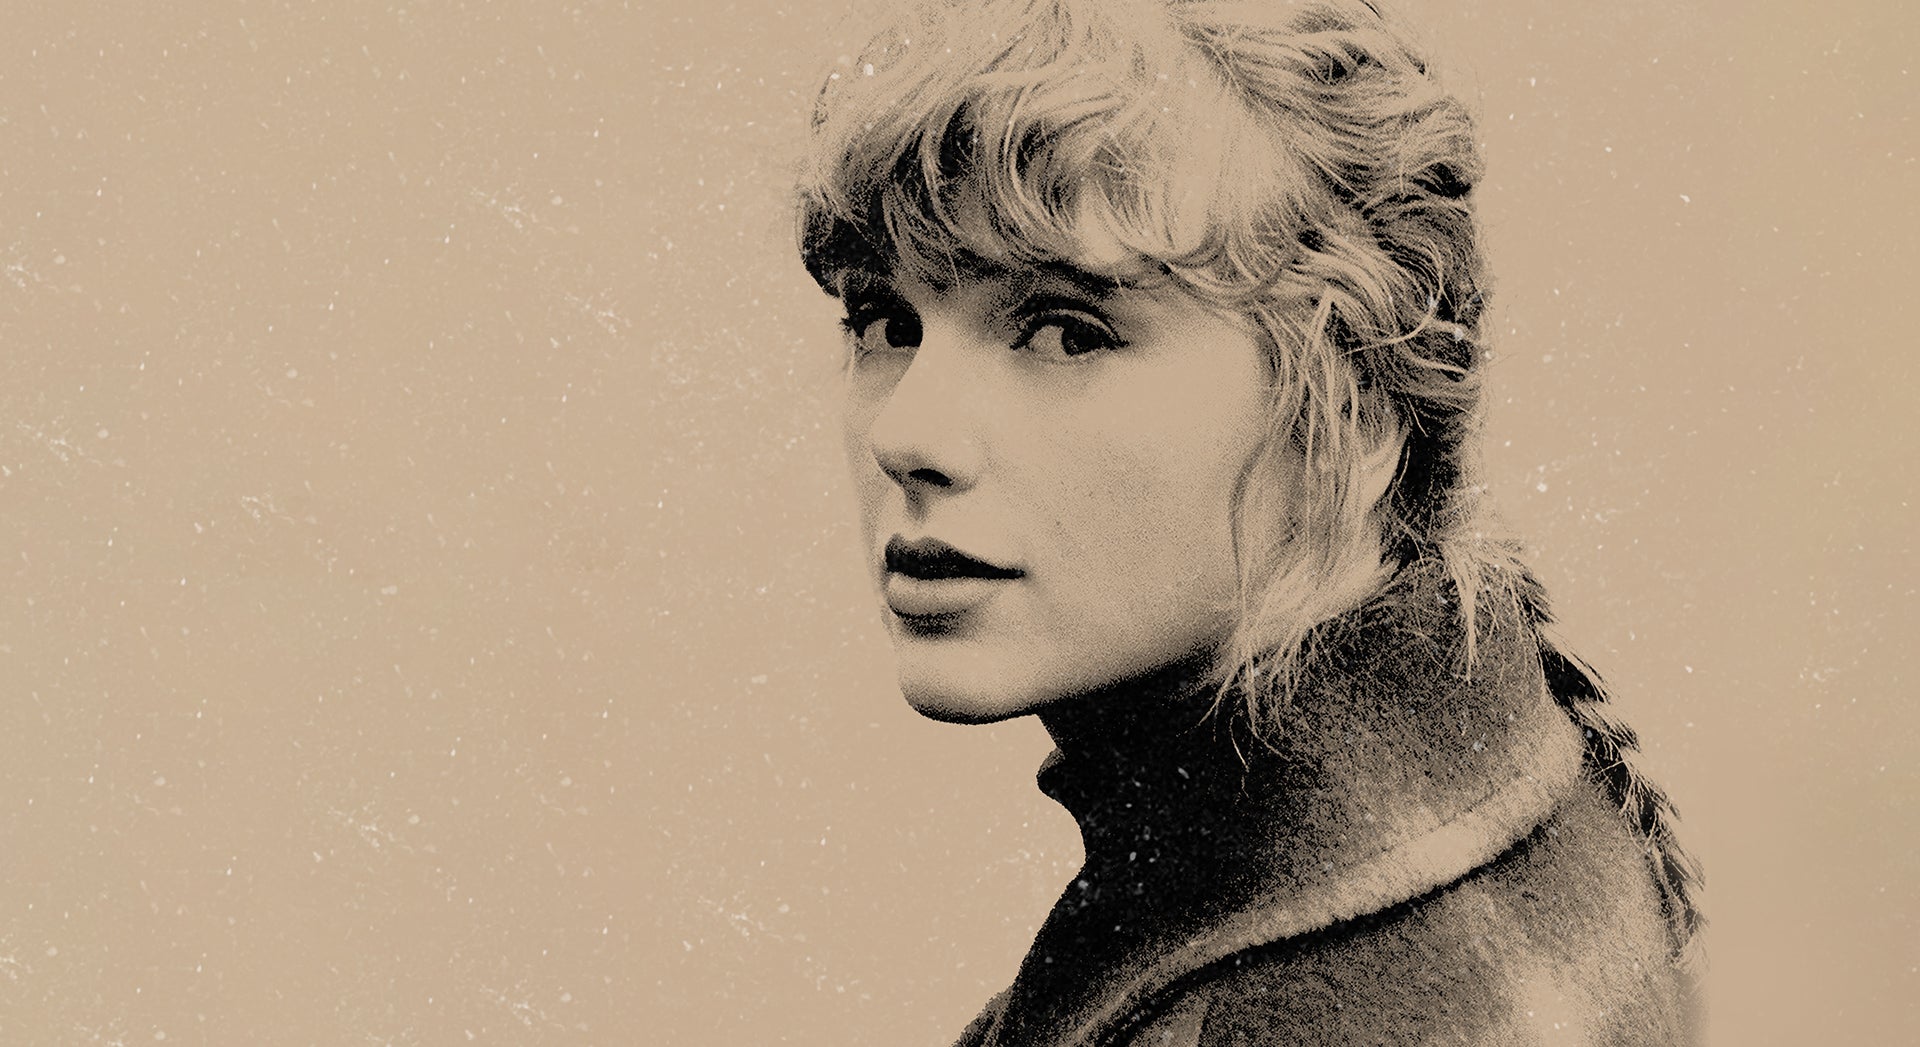 Taylor Swift evermore